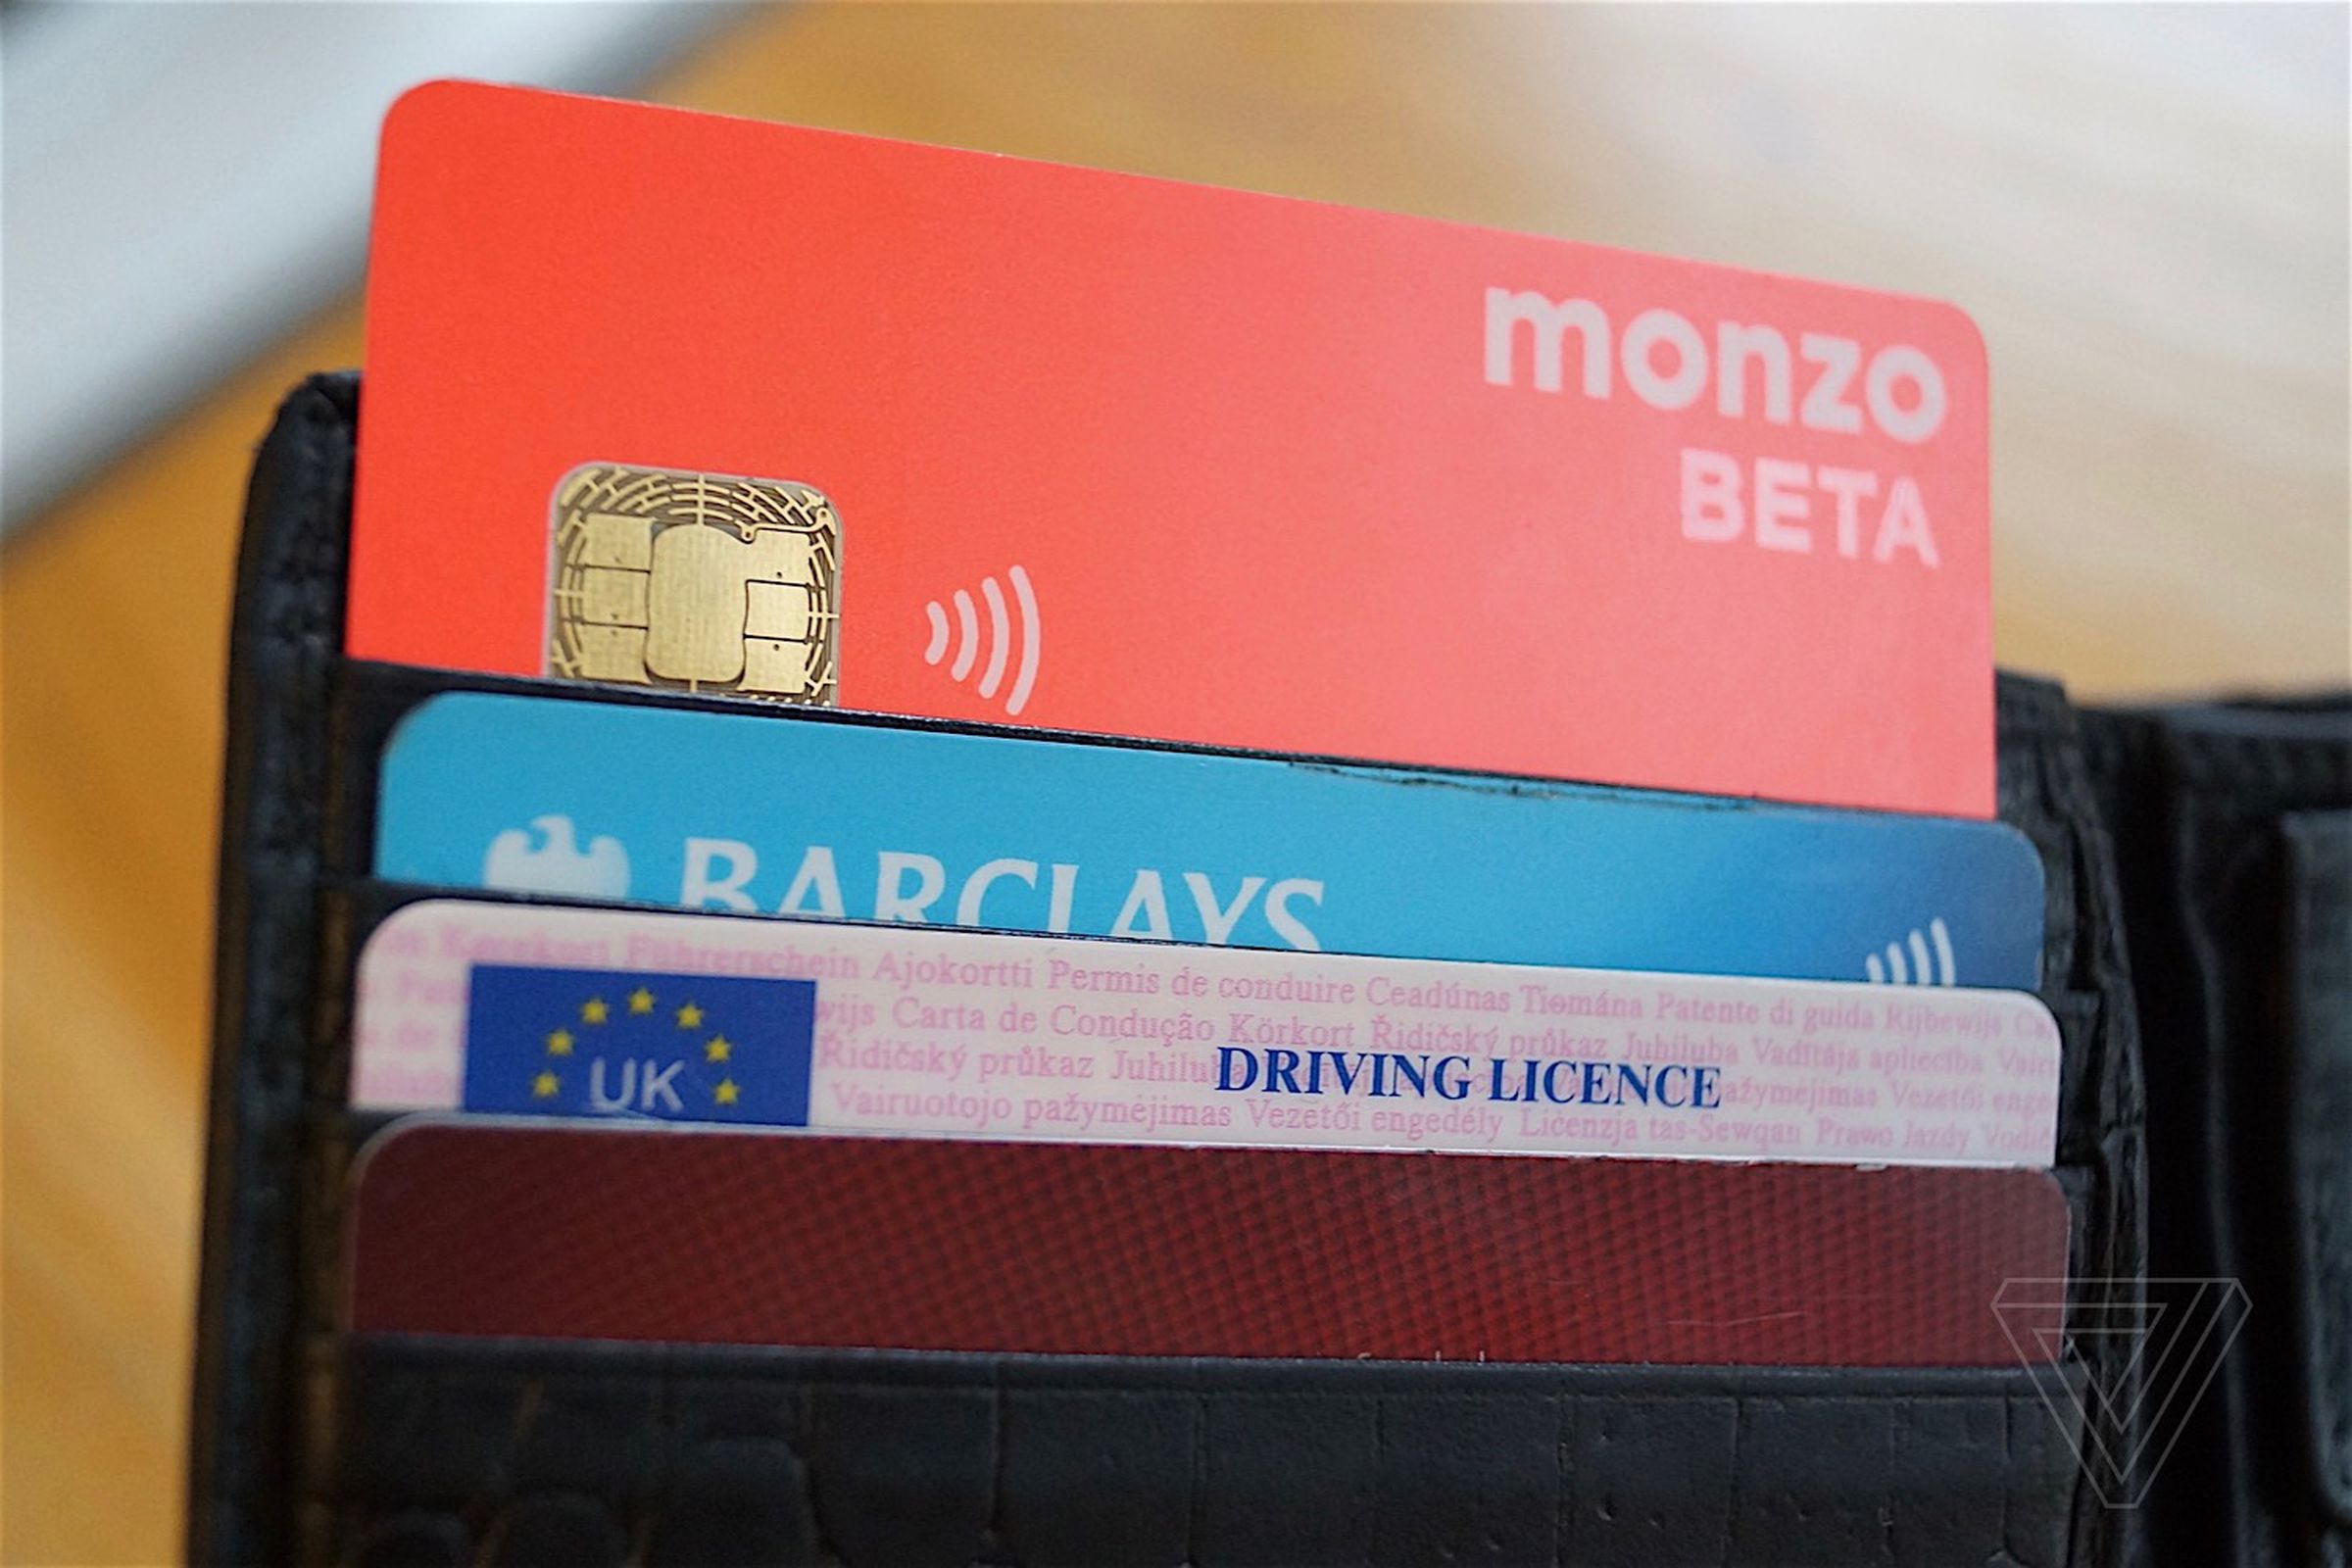 Monzo offers a prepaid card and banking app. 